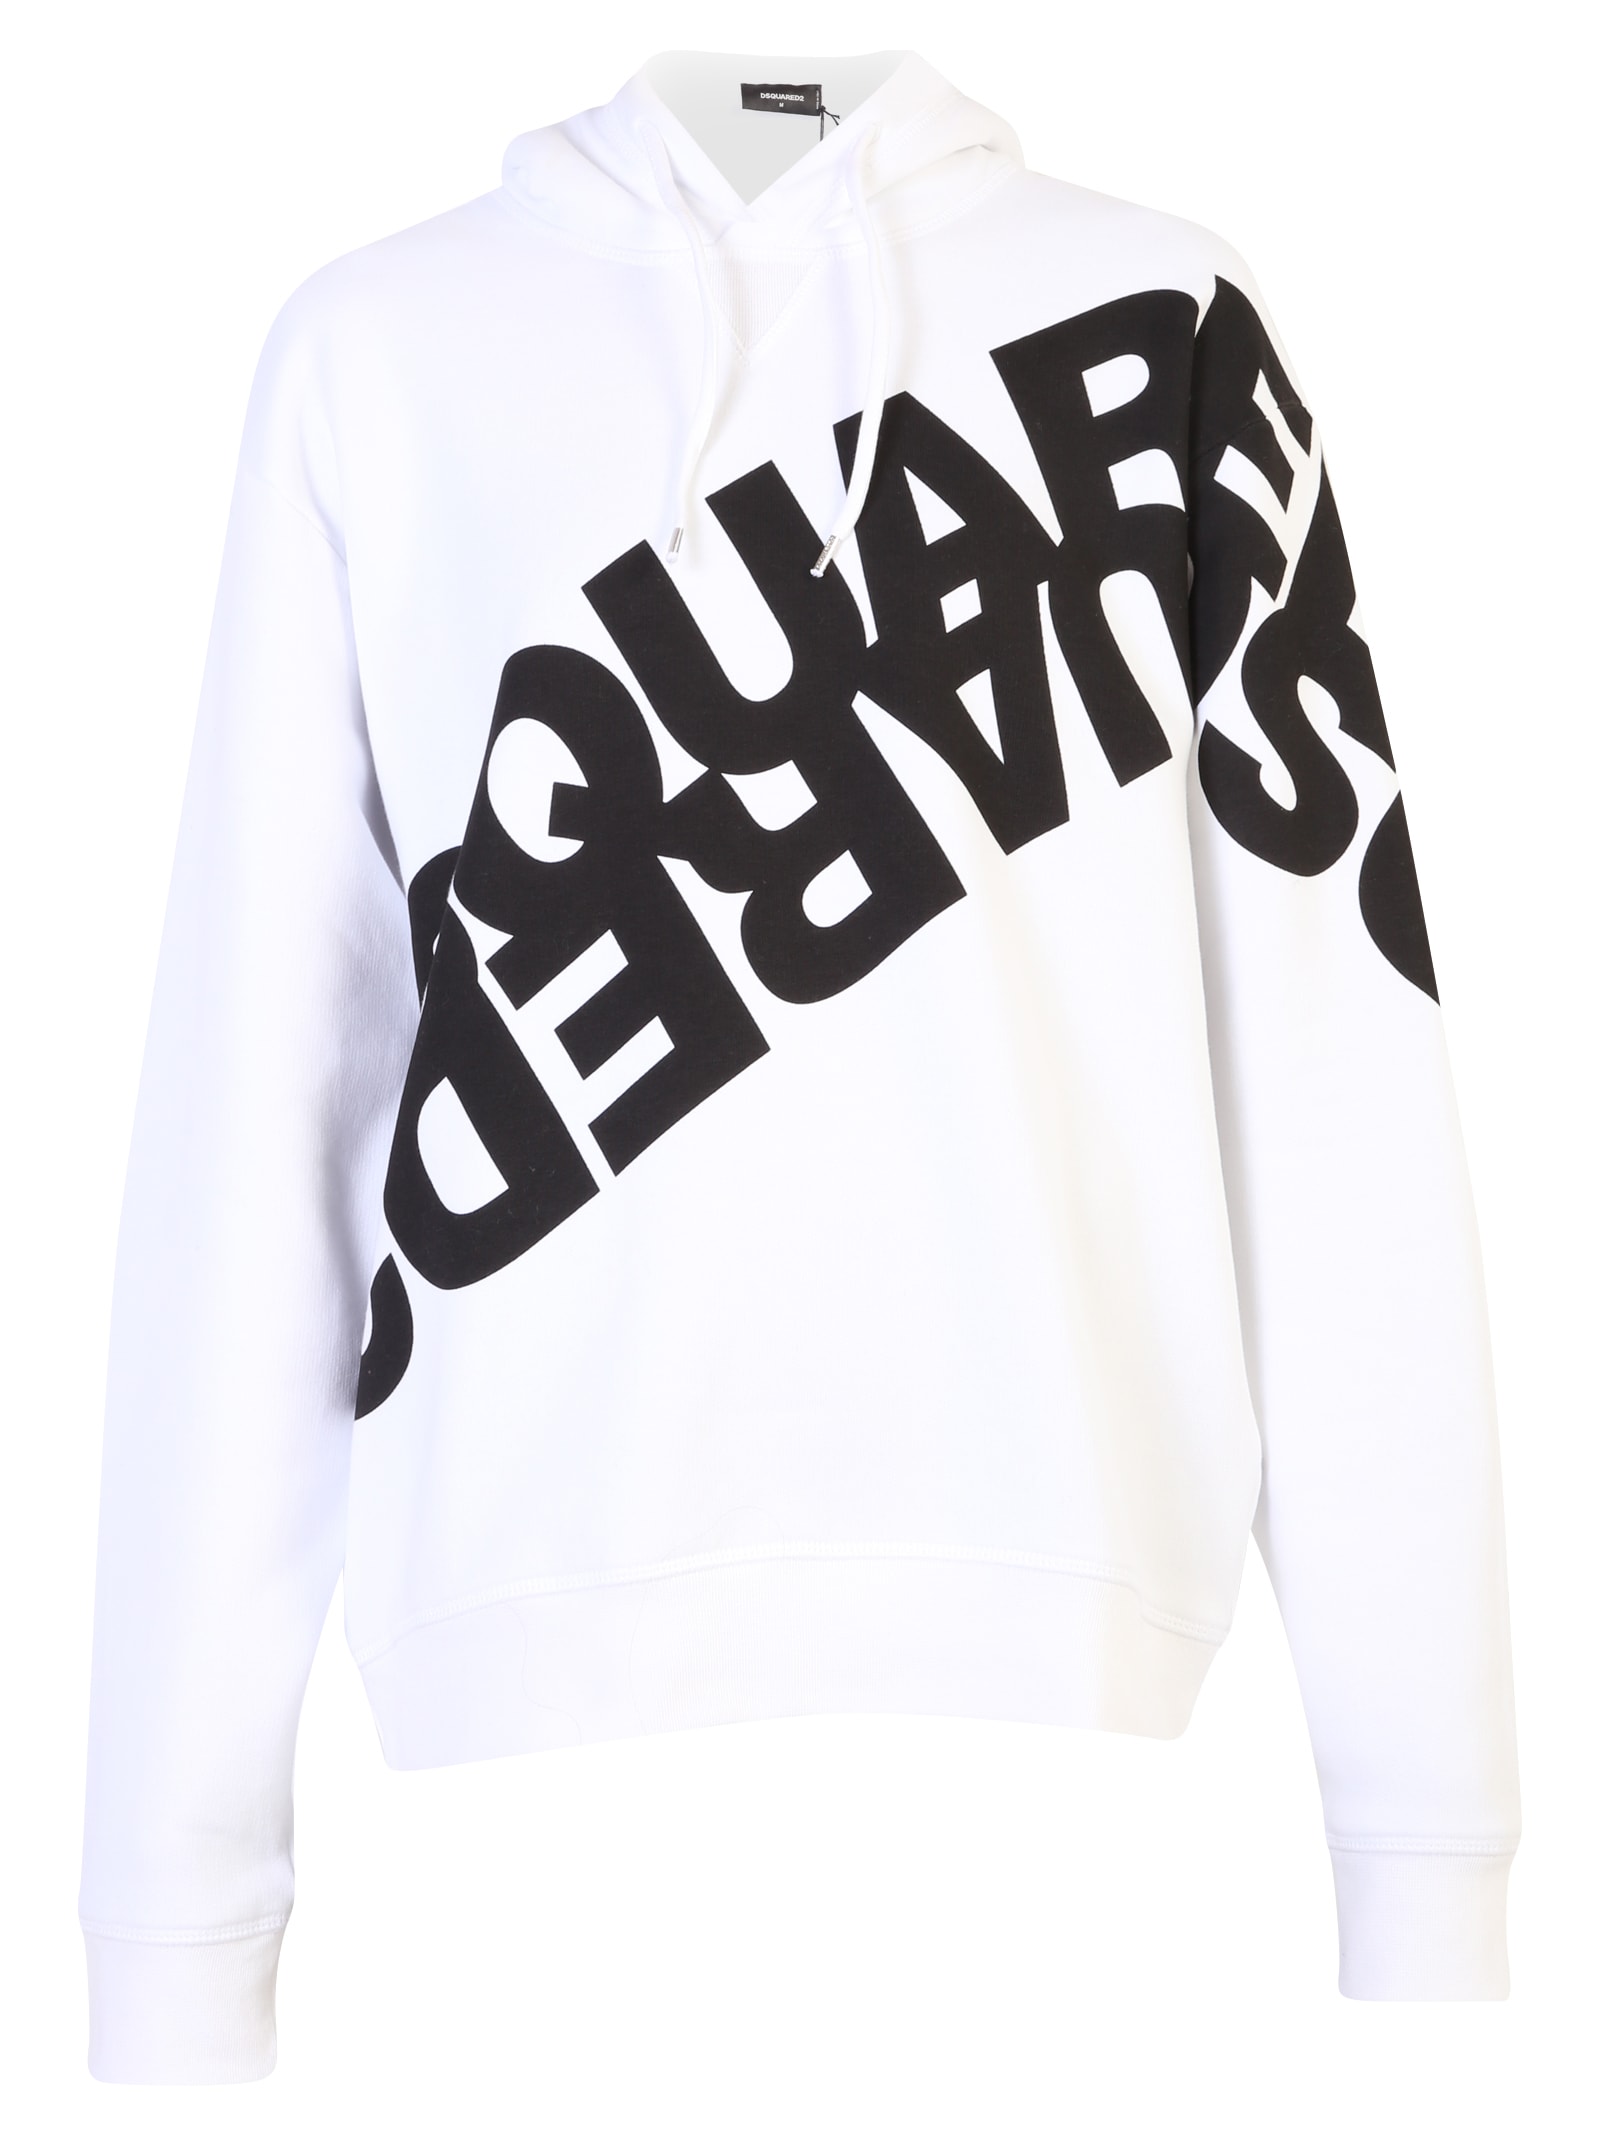 dsquared white hoodie